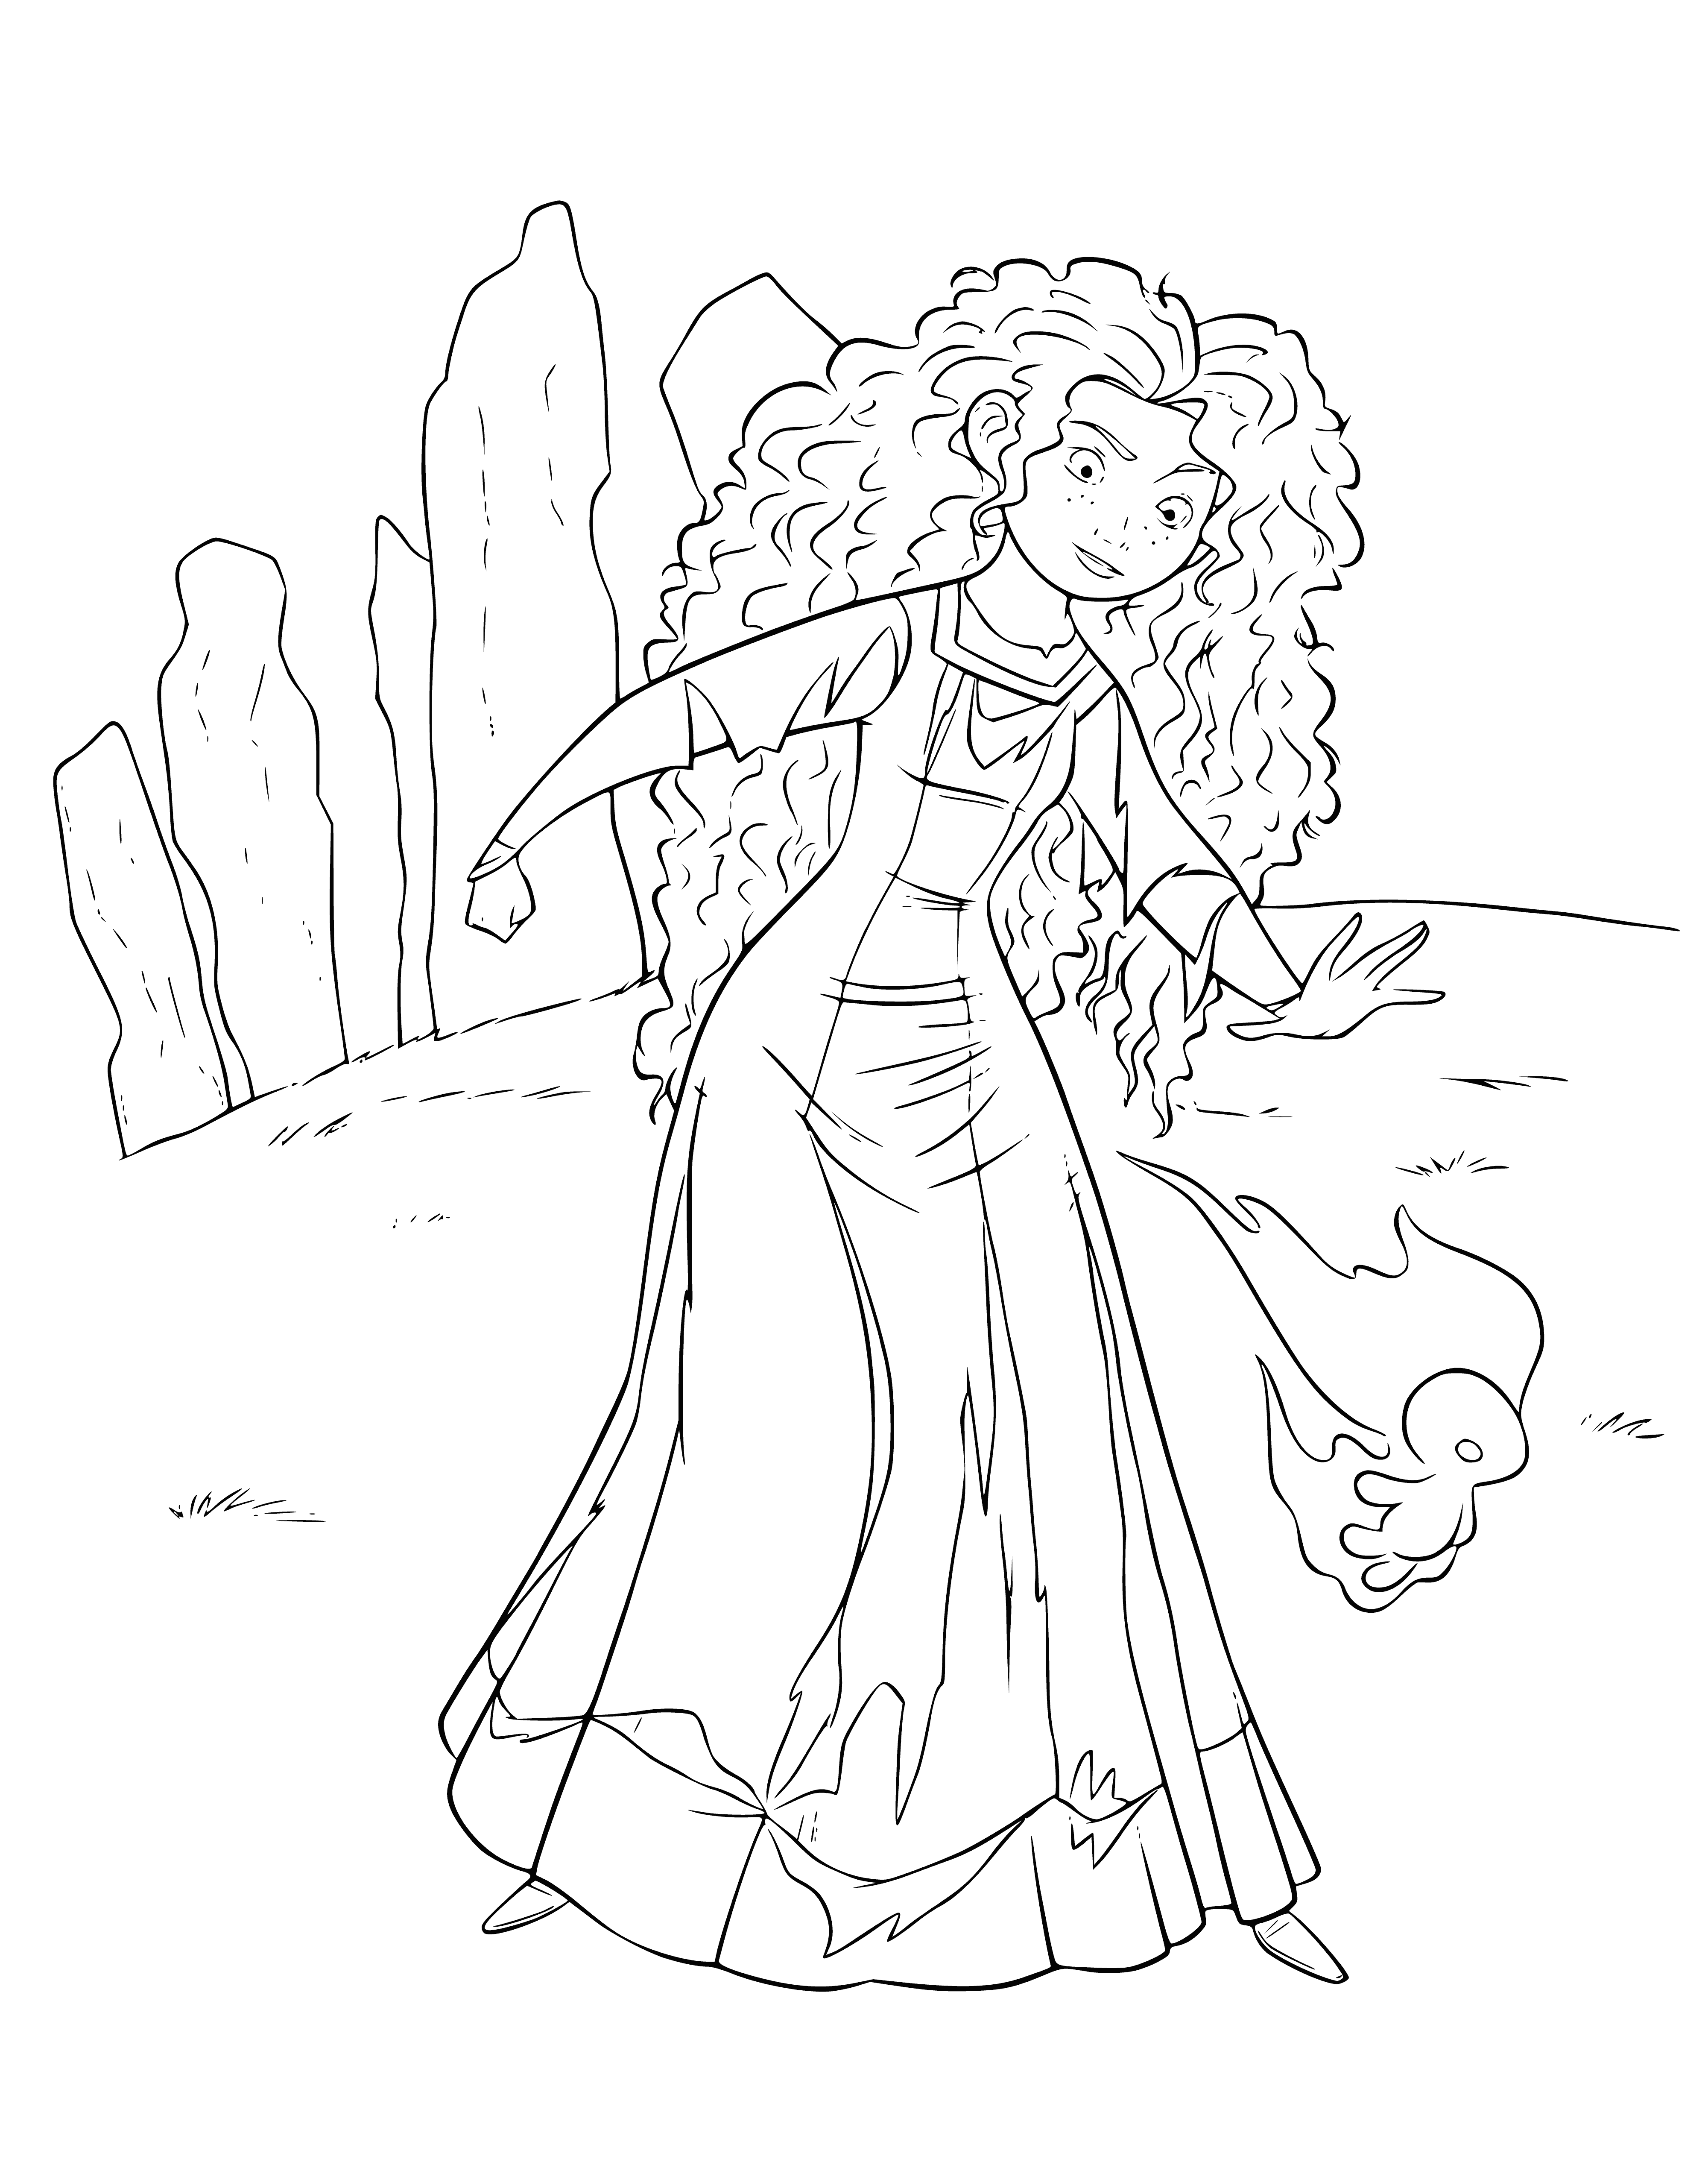 coloring page: Merida follows a light and goes on an adventure, meeting friends and learning about her heritage. #Brave #Scotland